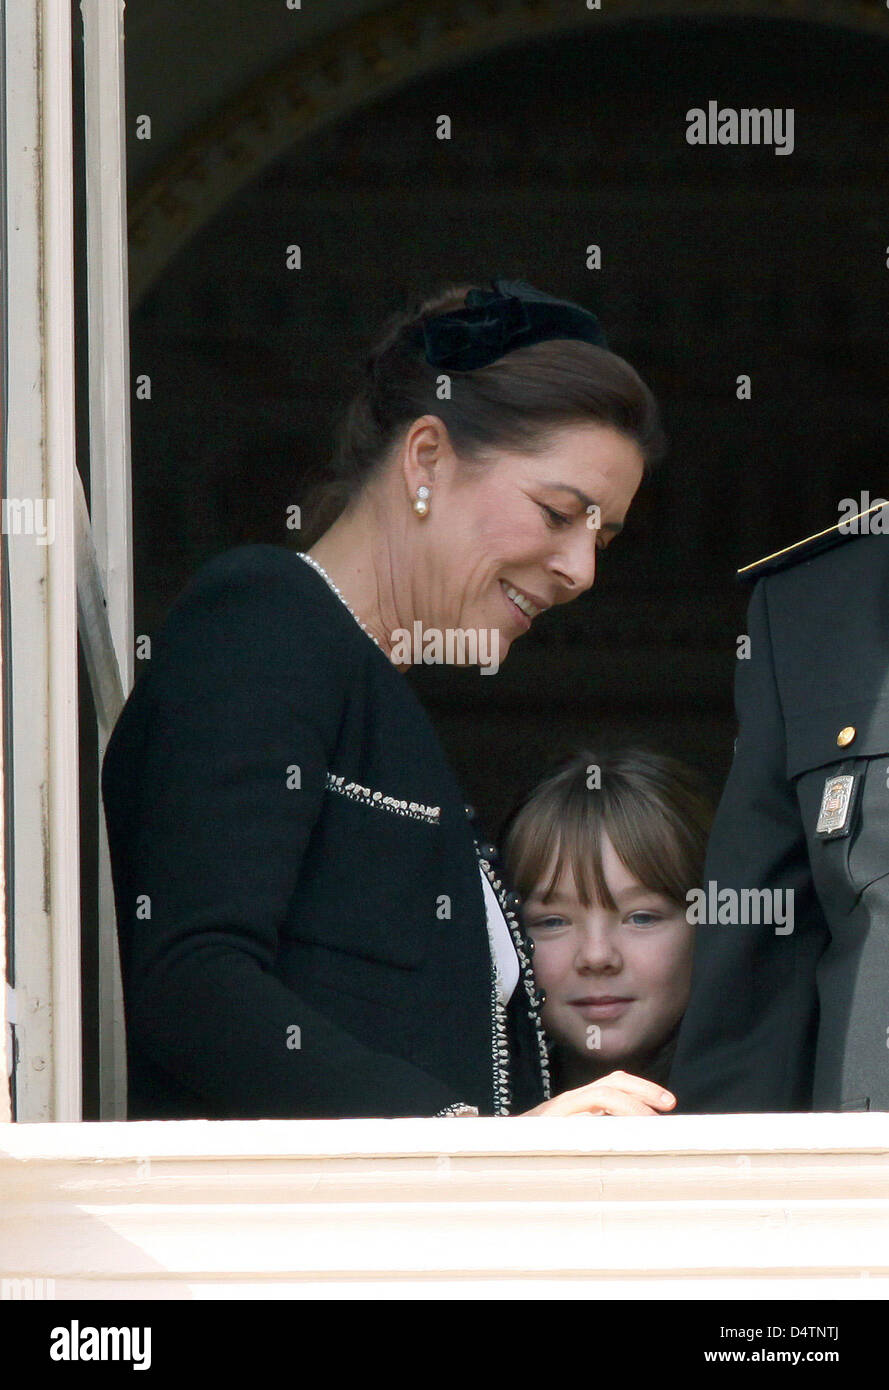 Princess Caroline of Hannover (L) and Princess Alexandra of Hanover (R) smile on a balcony during the Army Parade as part of Monaco?s National Day celebrations in Monte Carlo, Monaco, 19 November 2009. Photo: Albert Nieboer (NETHERLANDS OUT) Stock Photo